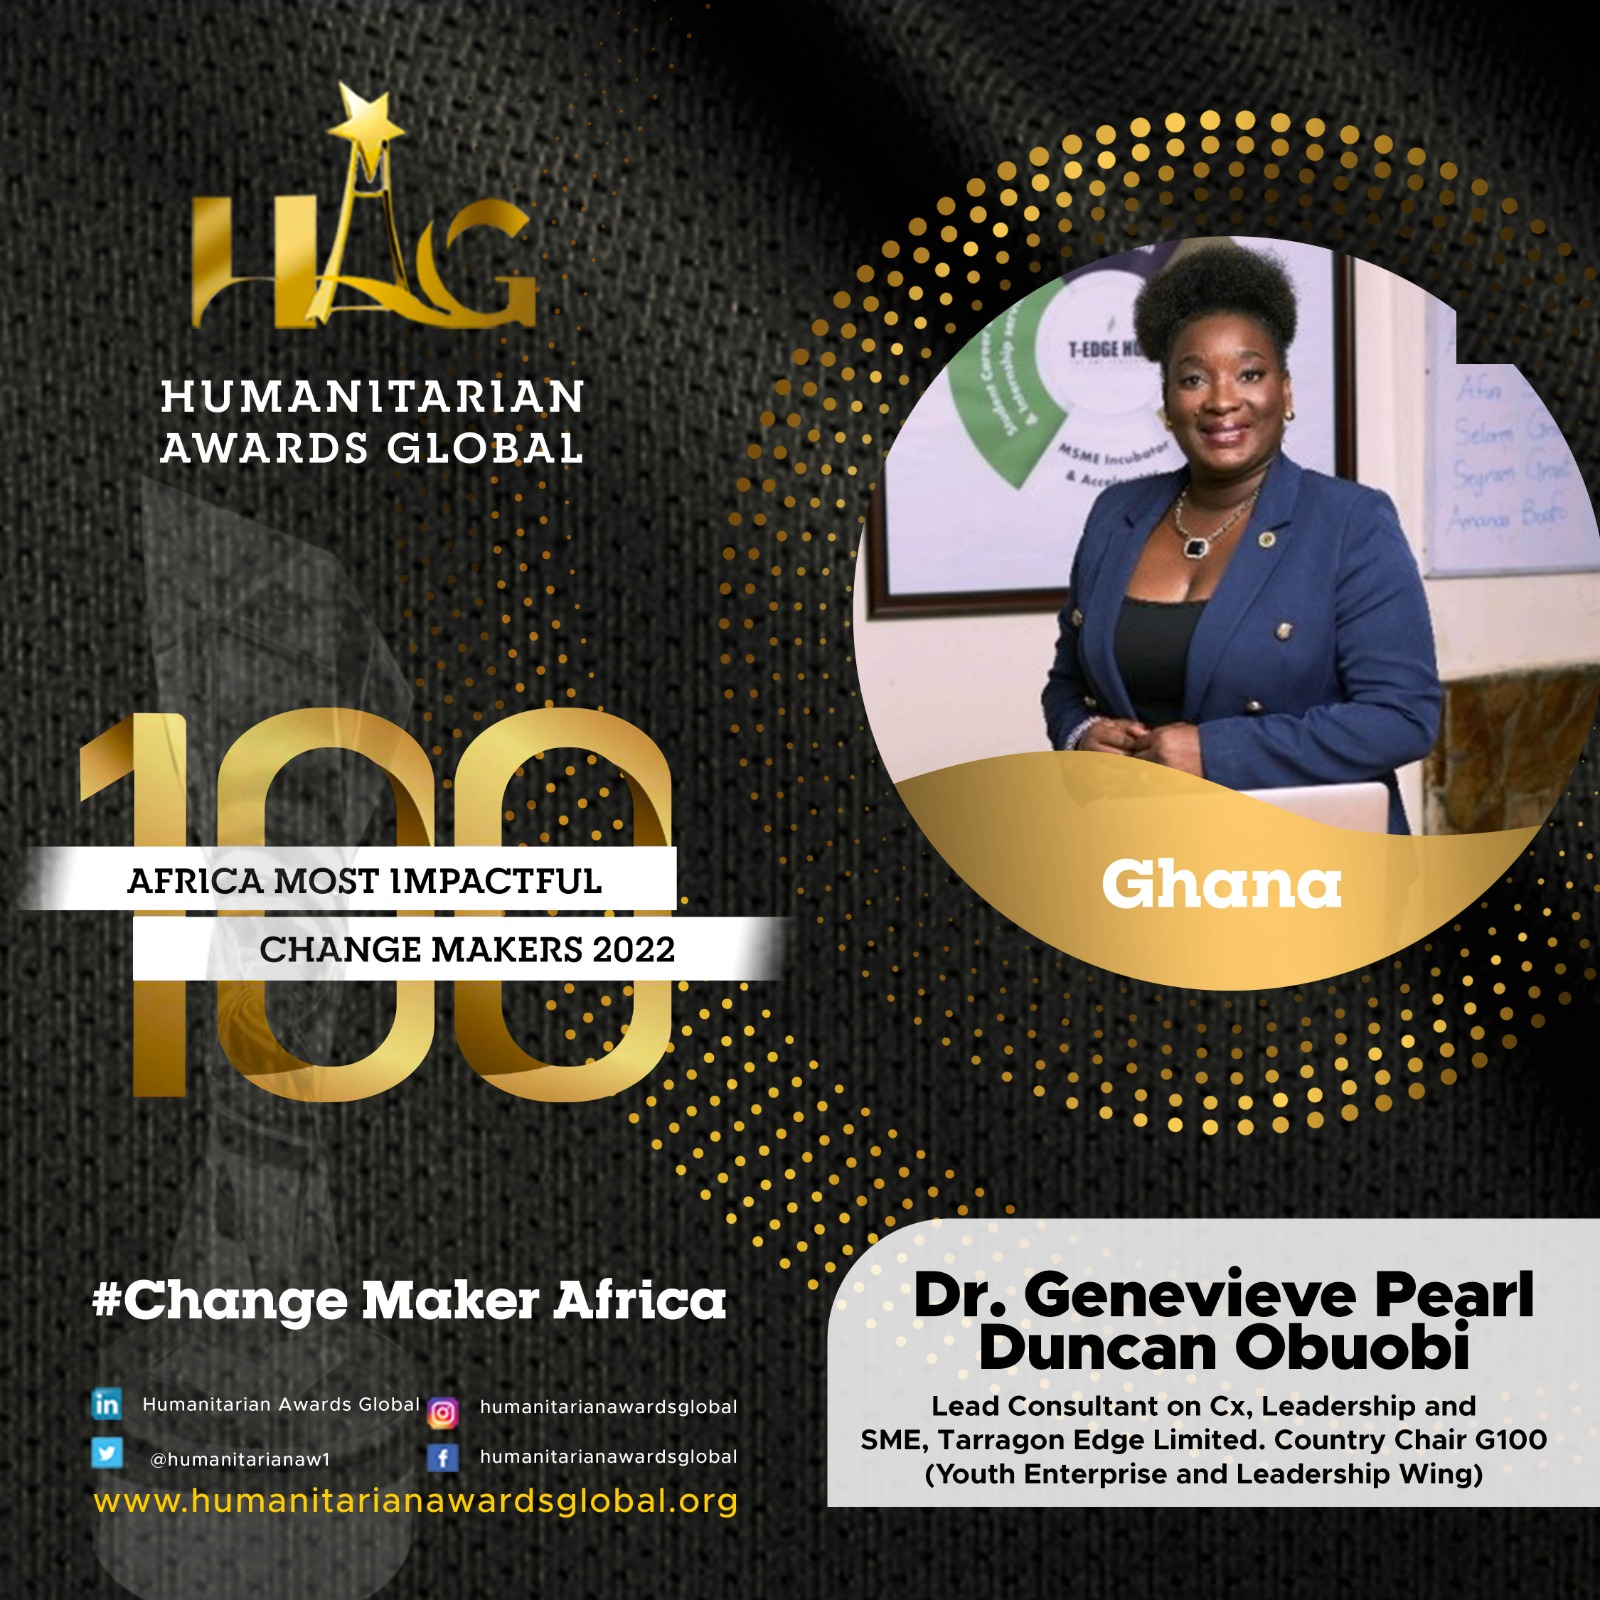 THE HUMANITARIAN AWARDS GLOBAL (HAG) RECOGNIZES DR. GENEVIEVE DUNCAN OBUOBI AS AN INSPIRING AND INFLUENTIAL CHANGE MAKER FROM AFRICA FOR 2022